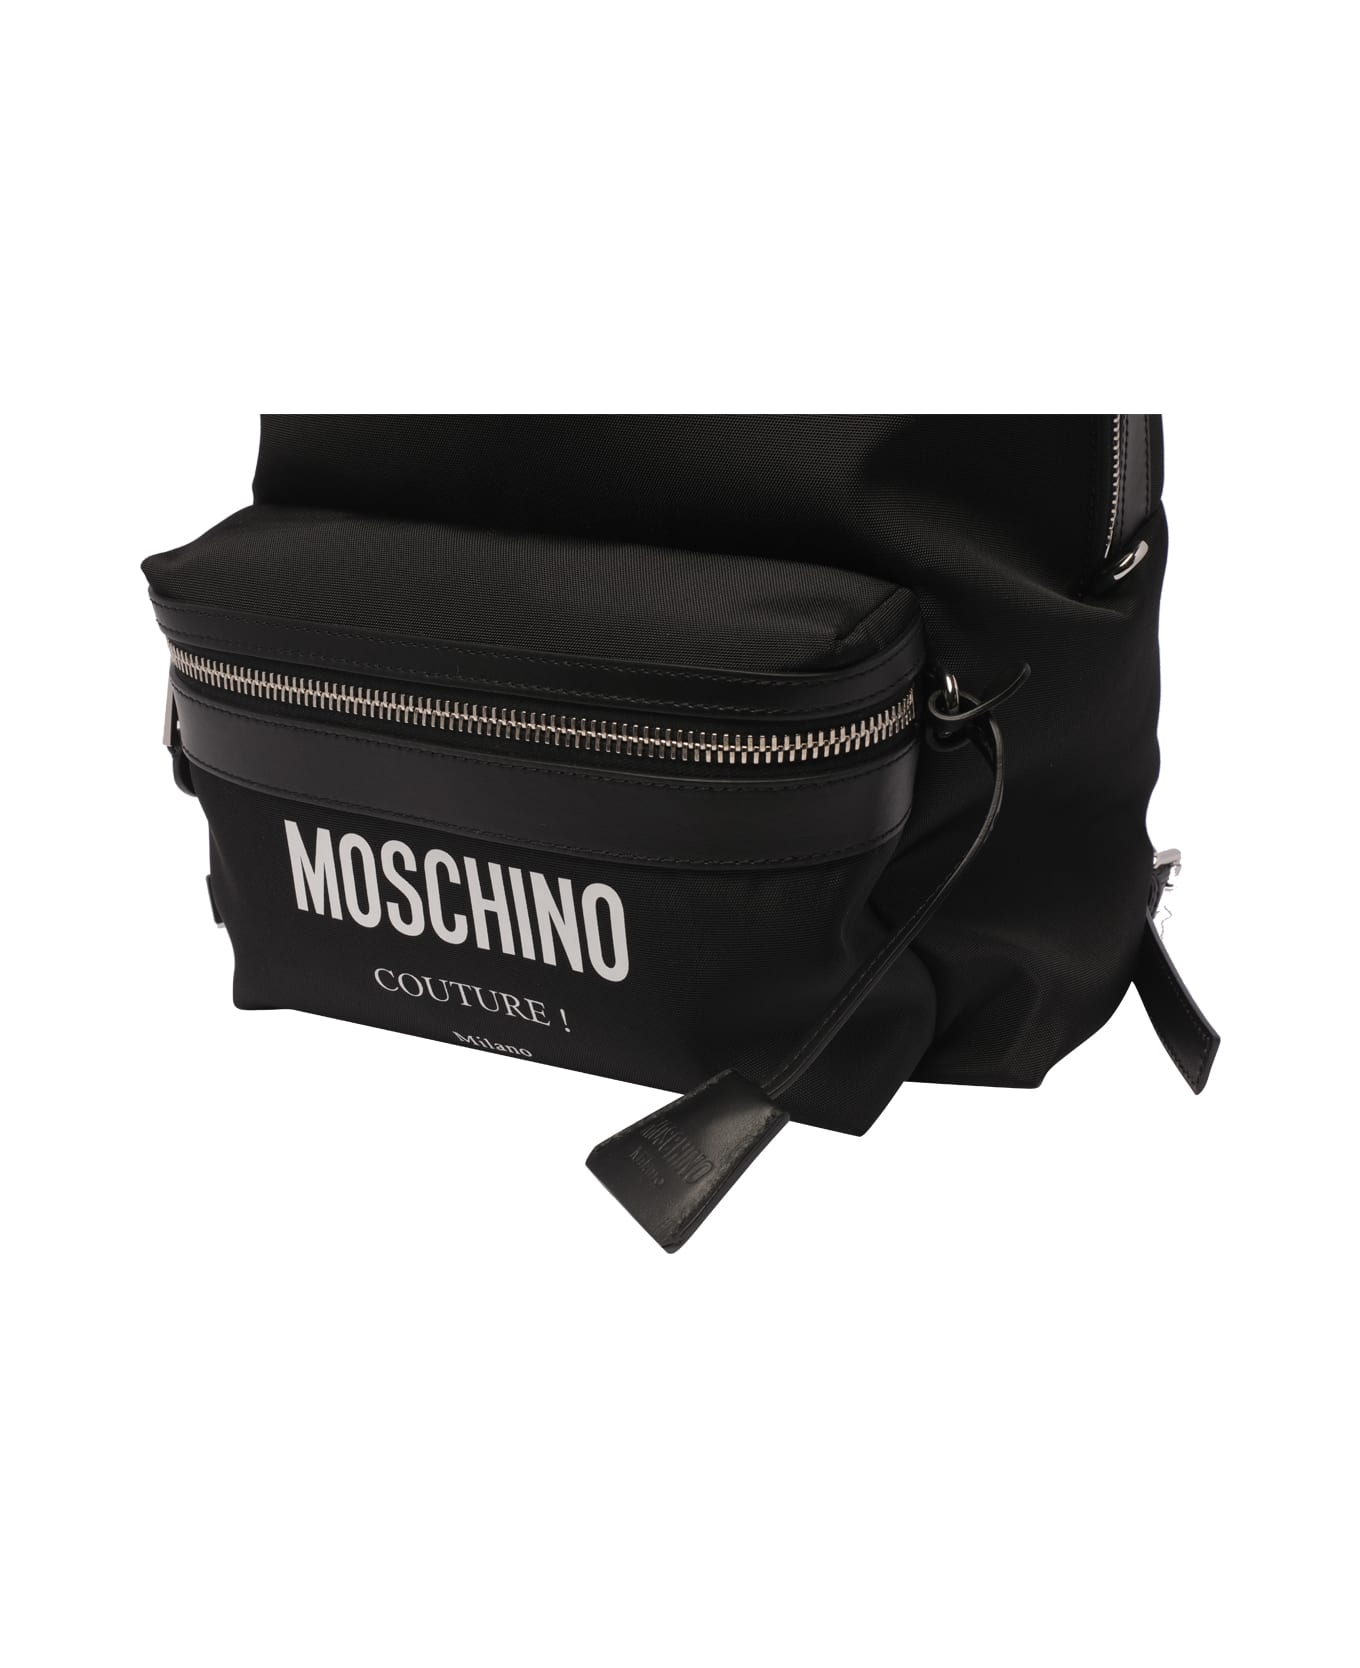 Moschino Couture Backpack - Black